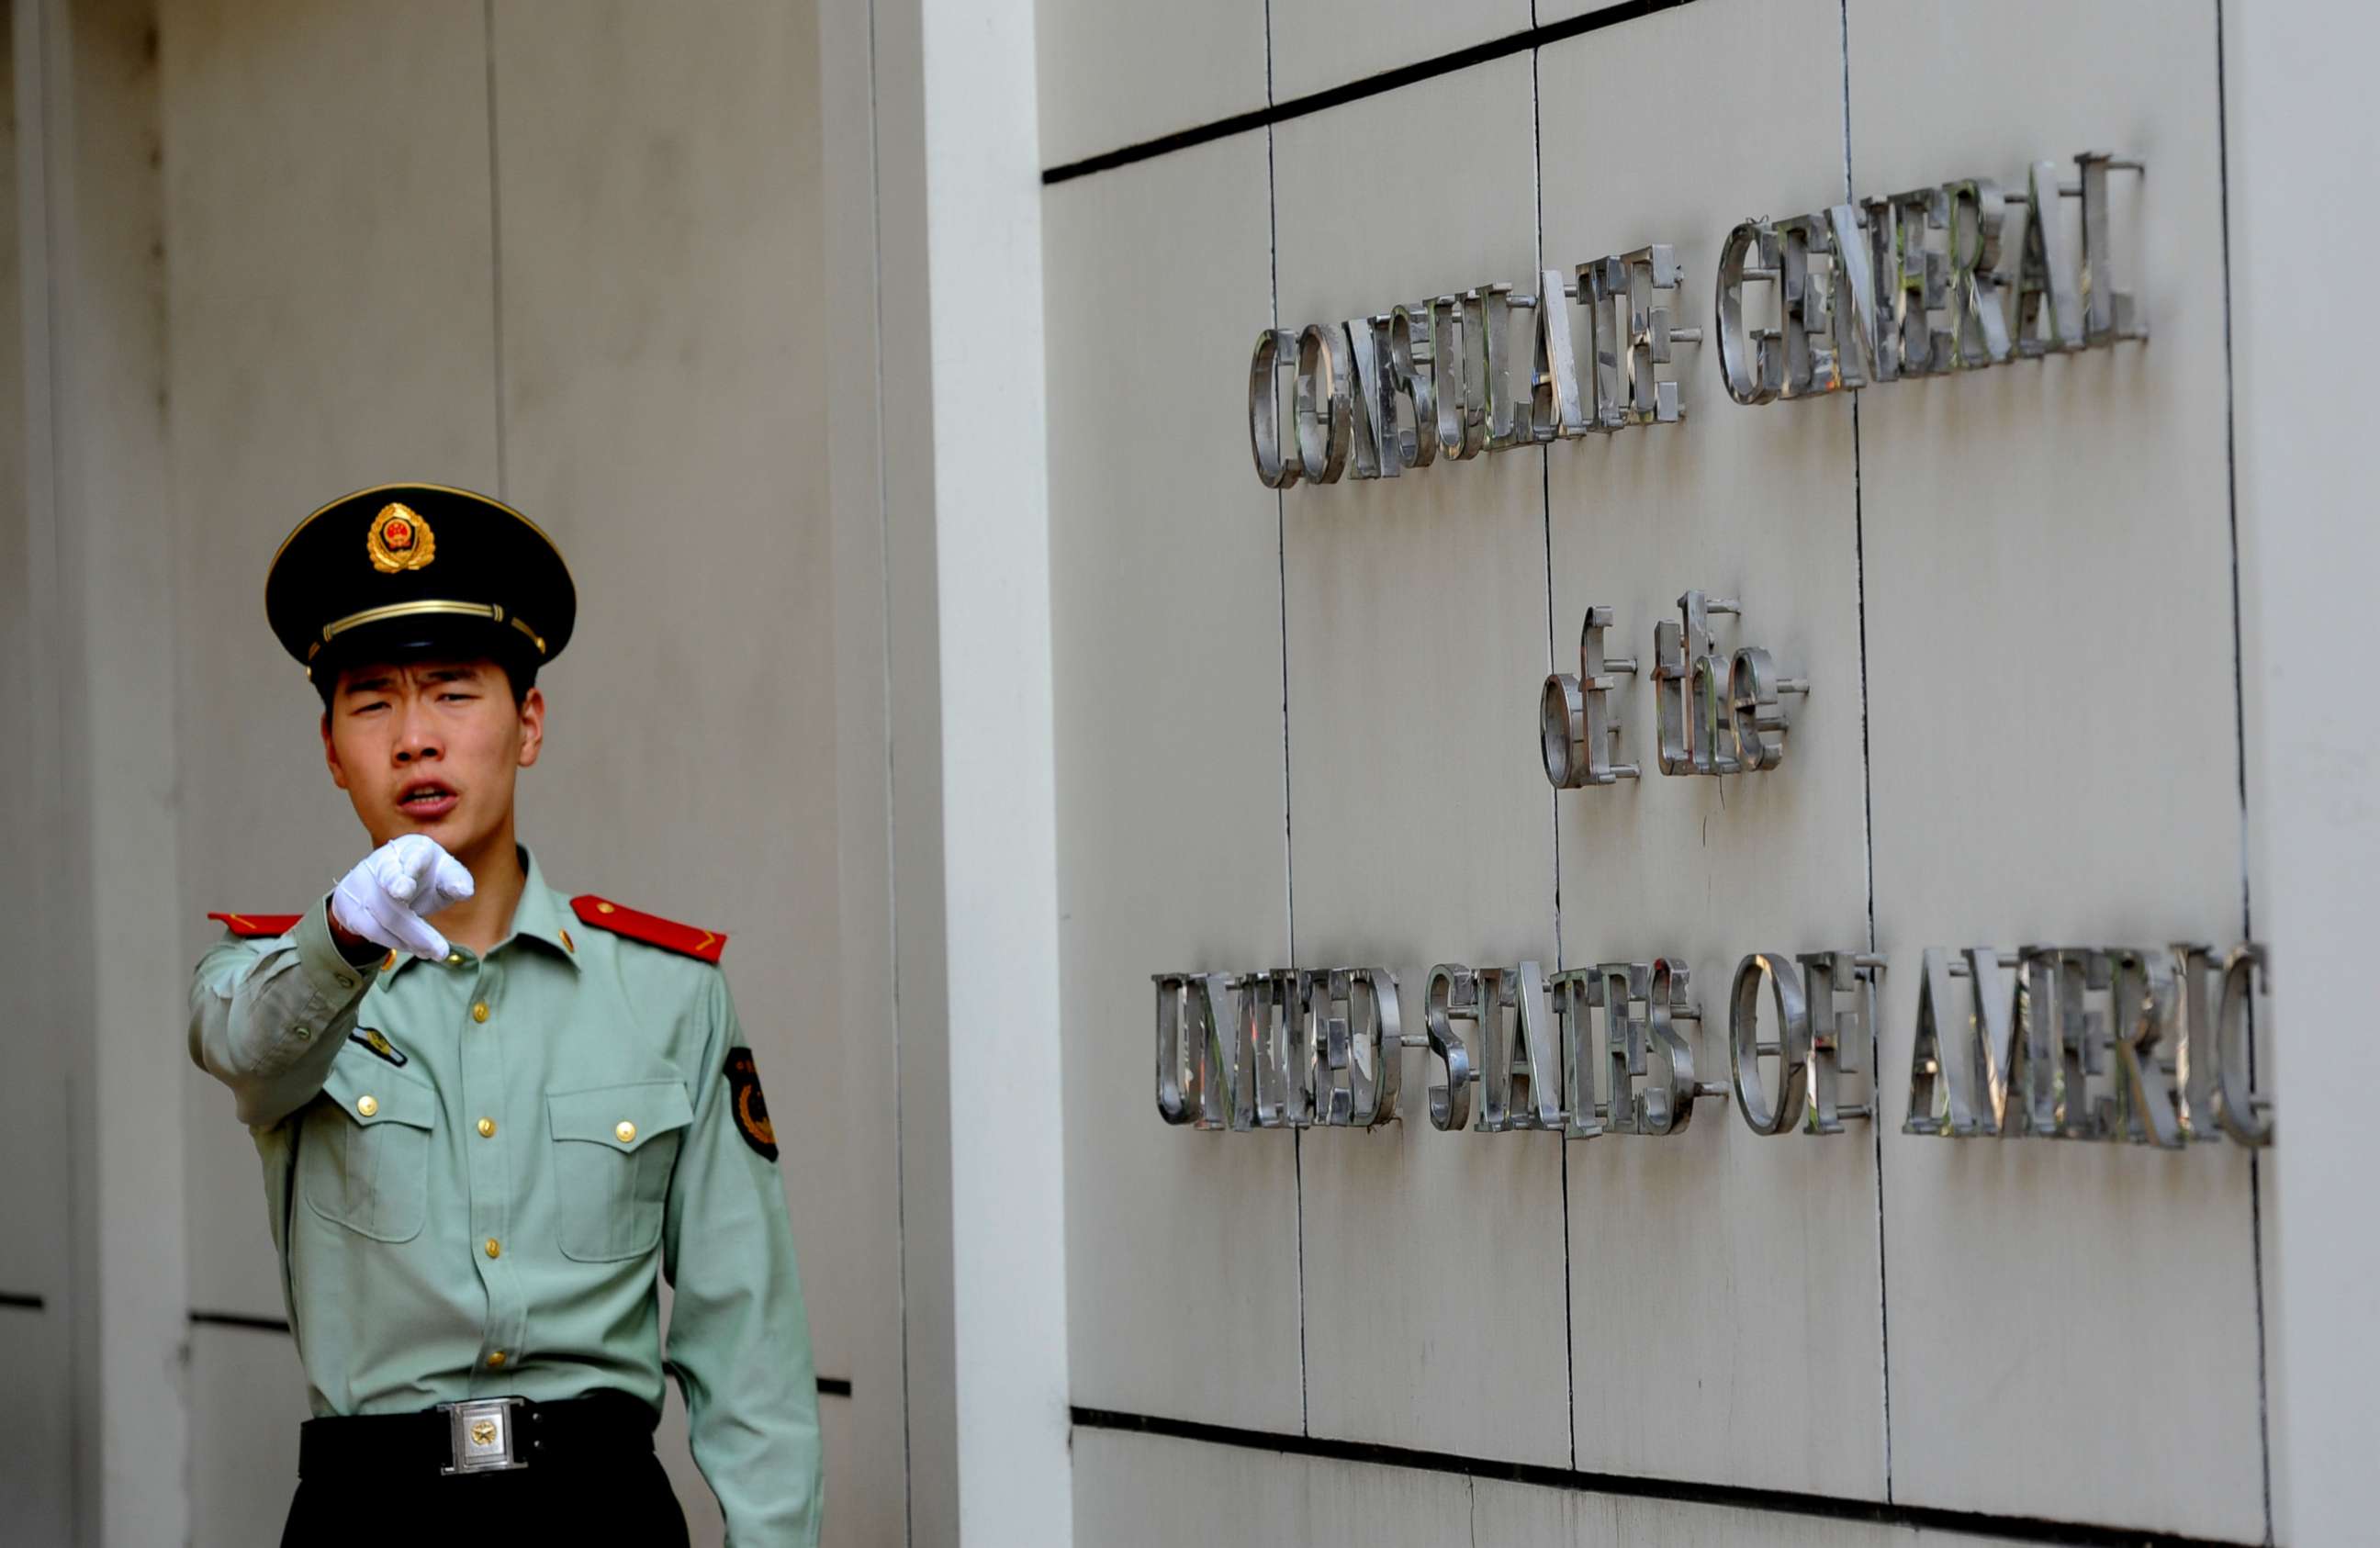 PHOTO: (FILES) This file photo taken on September 18, 2012 shows a Chinese paramilitary policeman gesturing to photographers at the entrance to the US consulate in Chengdu, southwest China's Sichuan province.